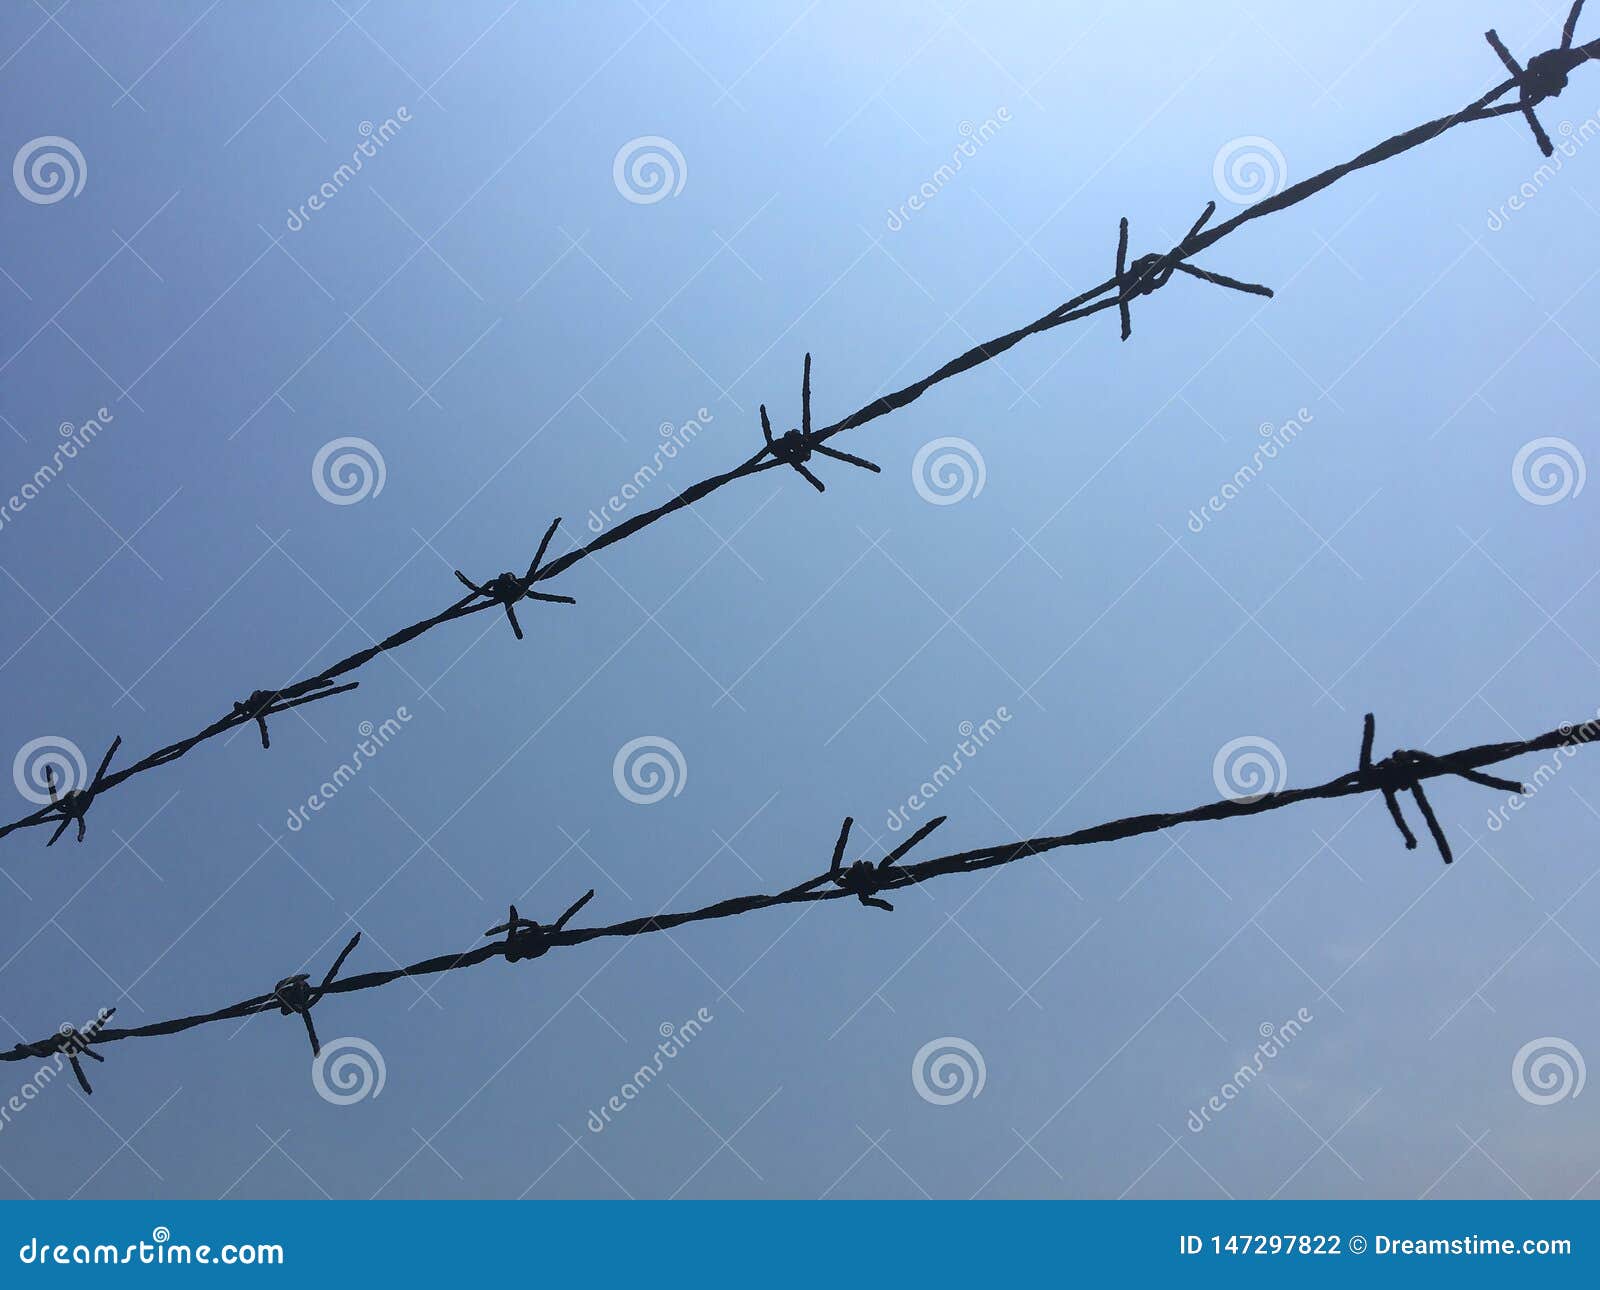 barbed wire barb wire bobbed wire bob wire steel fencing wire sharp edges